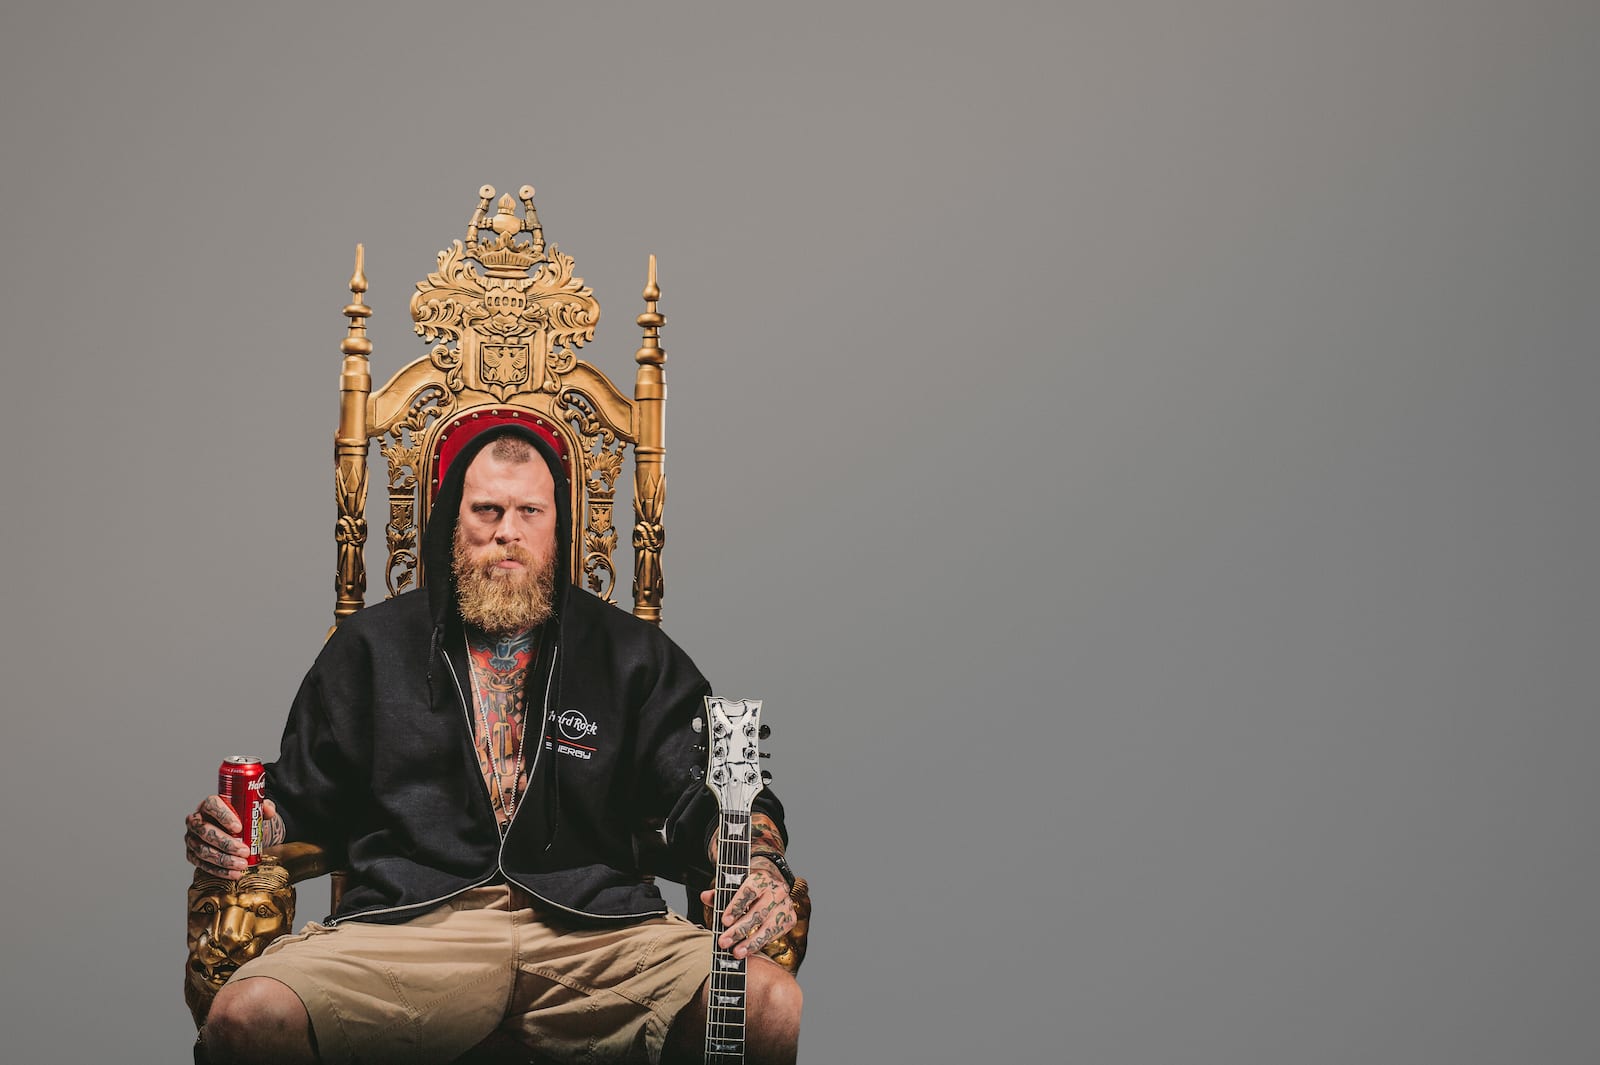 Bearded tattooed man holding Hard Rock Energy drink in one hand and a guitar in the other sitting on a throne posing for camera wearing a black hooded jacket